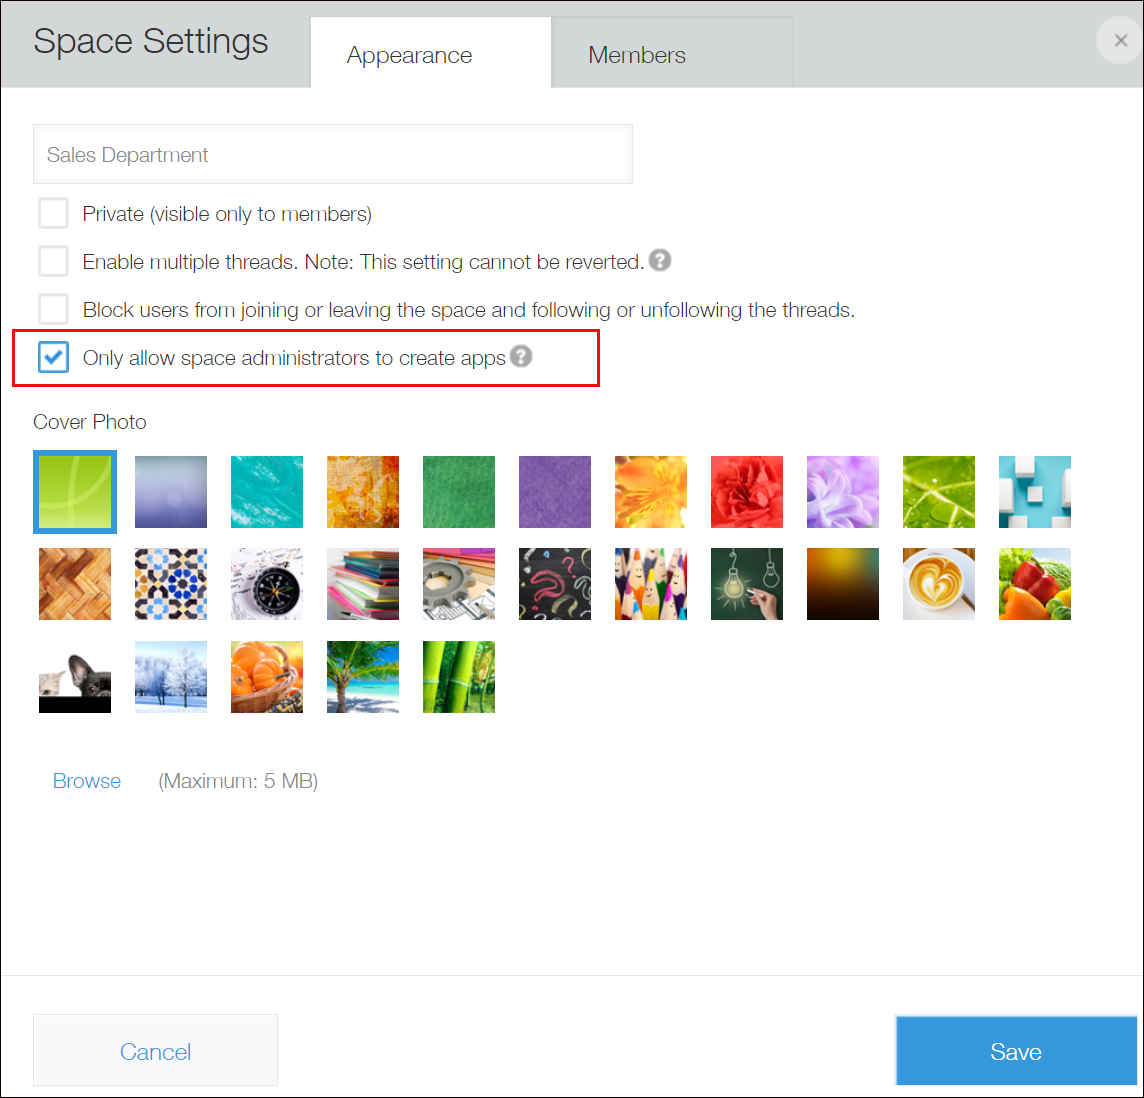 Screenshot: "Only allow space administrators to create apps" is outlined in red on the "Space Settings" screen